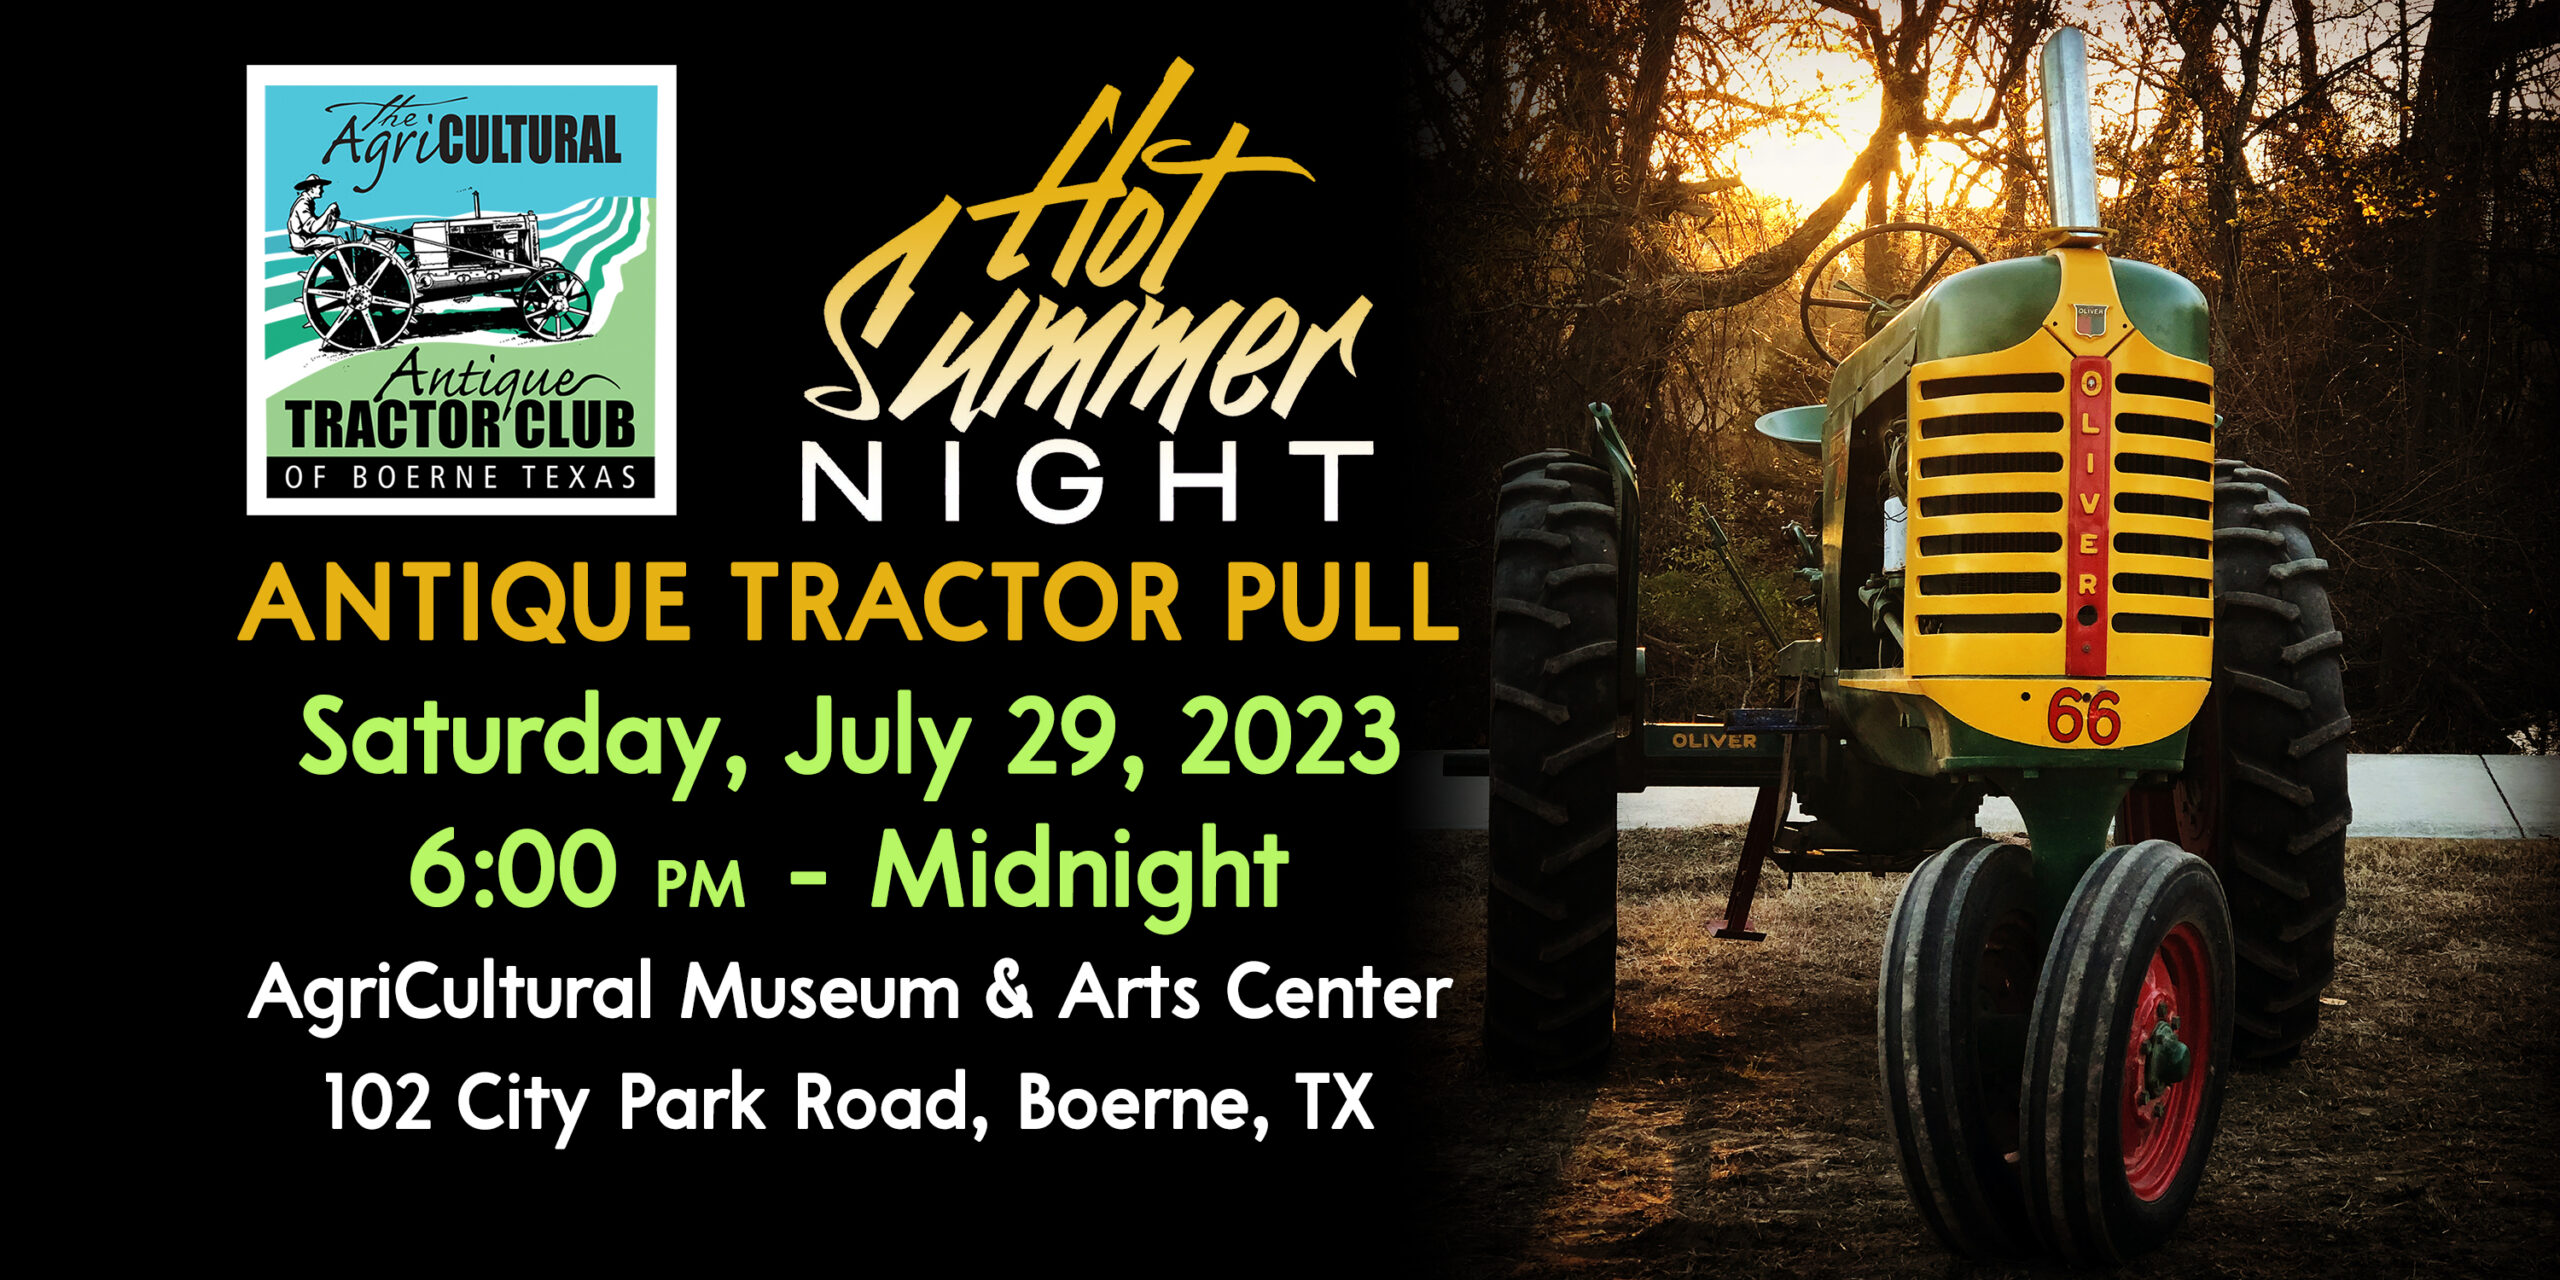 Antique Tractor Pull | The AgriCultural Museum and Arts Center